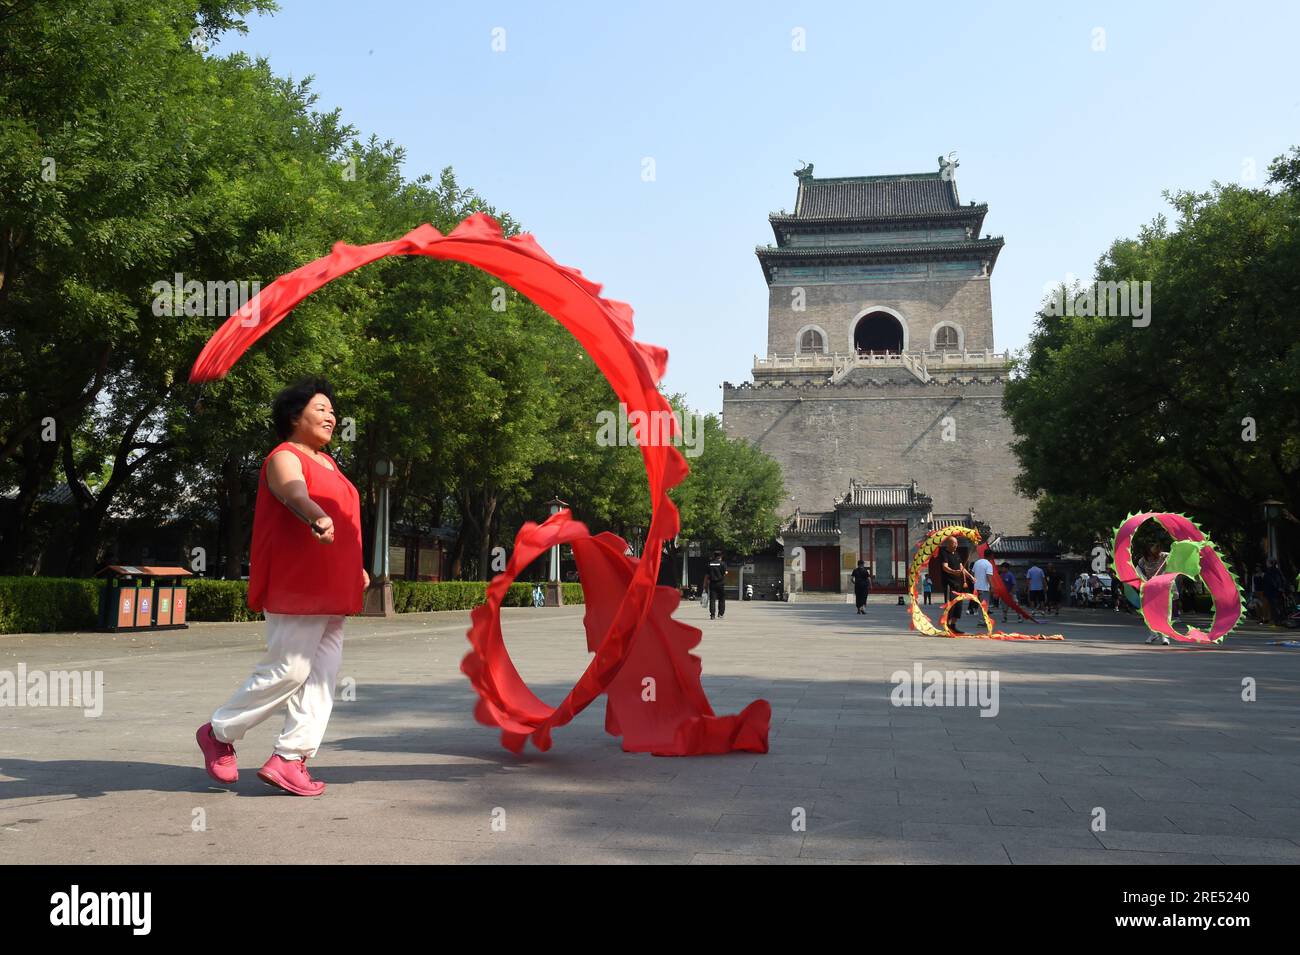 (230725) -- BEIJING, July 25, 2023 (Xinhua) -- People exercise in front of the Bell Tower in Beijing, capital of China, July 18, 2023.  First created in the Yuan Dynasty (1271-1368), the Beijing Central Axis, or Zhongzhouxian, stretches 7.8 kilometers between the Yongding Gate in the south of the city and the Drum Tower and Bell Tower in the north. Most of the major old-city buildings of Beijing sit along this axis.   Gates, palaces, temples, squares and gardens of the old city are all linked up to the axis. As they witnessed the folk activities along the line from old days to new ones, they t Stock Photo